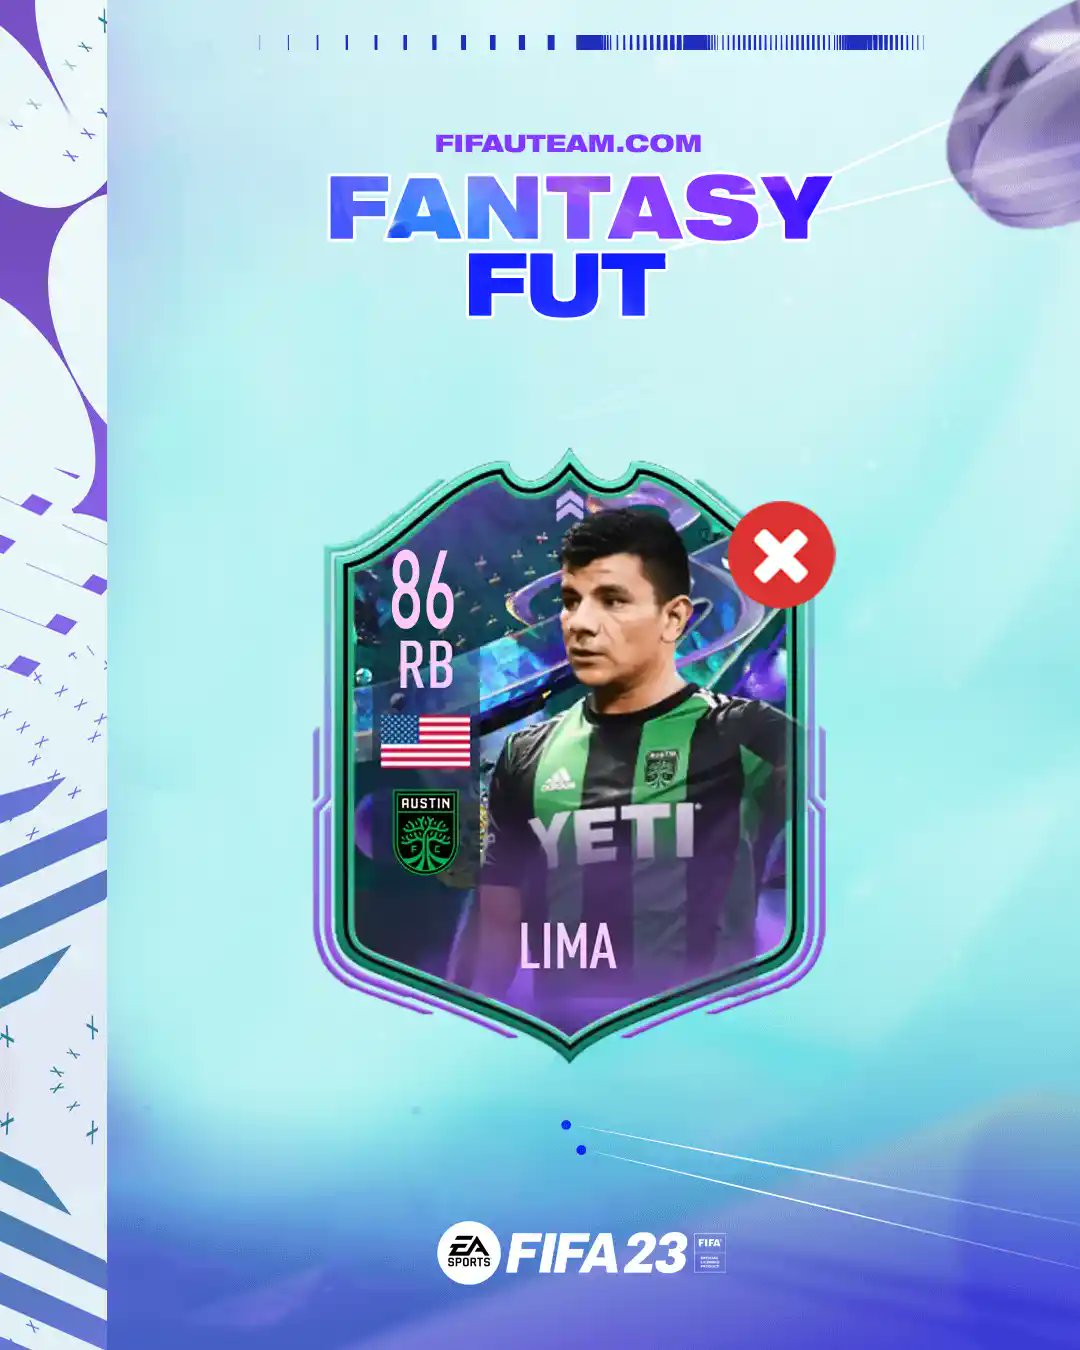 FUT Sheriff on Twitter: Nick Lima to come out as a FUT Fantasy SBC in the  coming days. Stats are predicted : r/AustinFC